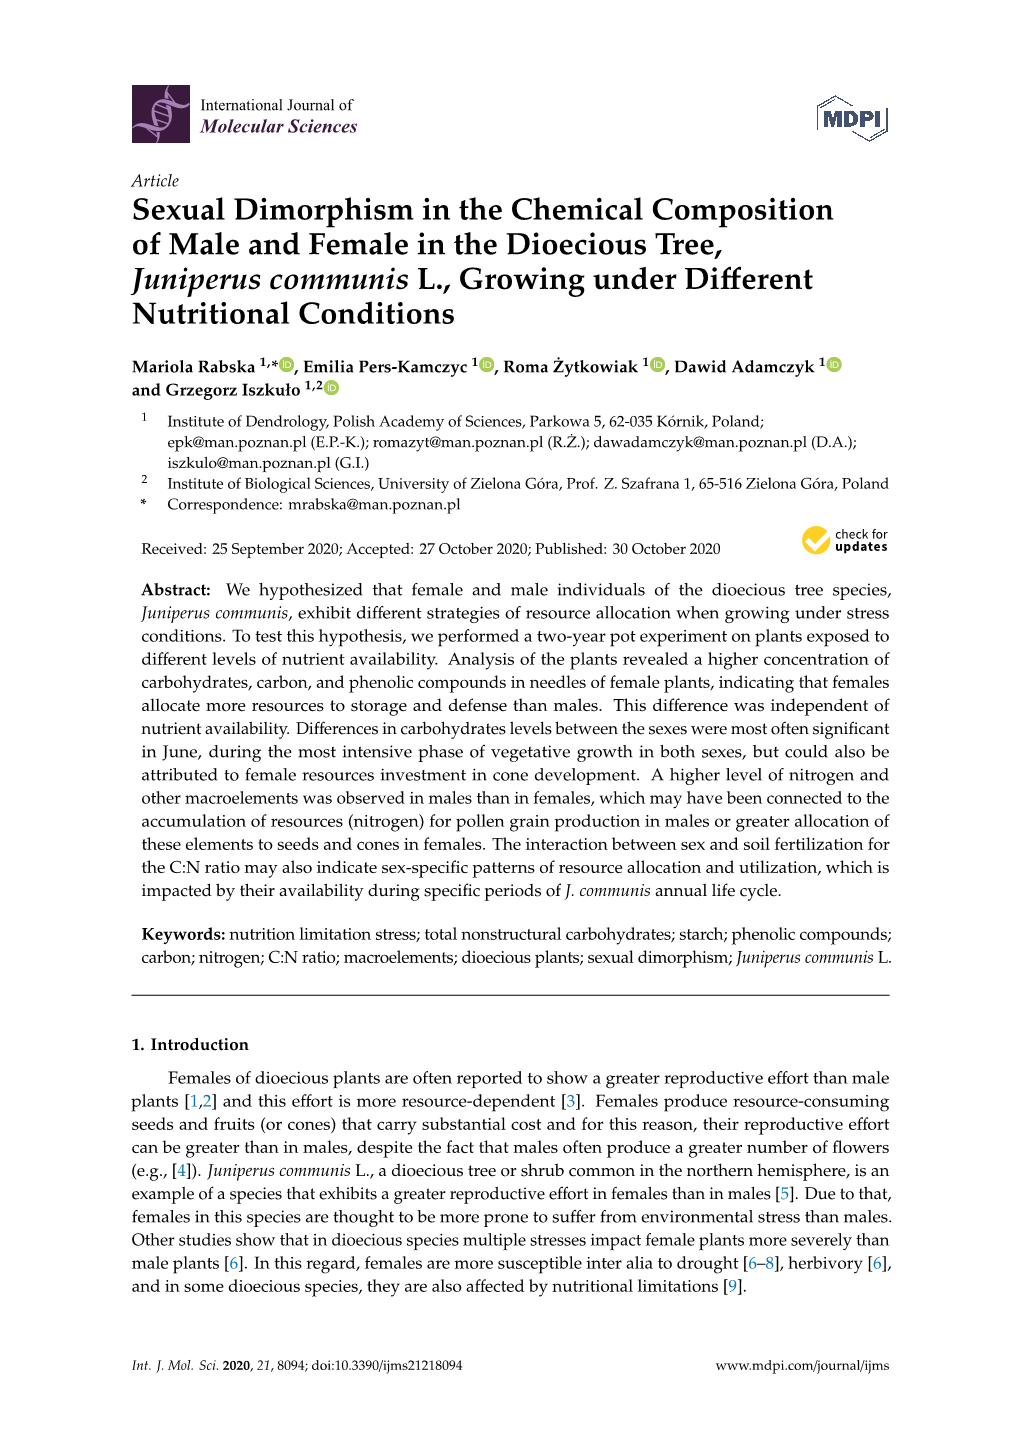 Sexual Dimorphism in the Chemical Composition of Male and Female in the Dioecious Tree, Juniperus Communis L., Growing Under Diﬀerent Nutritional Conditions